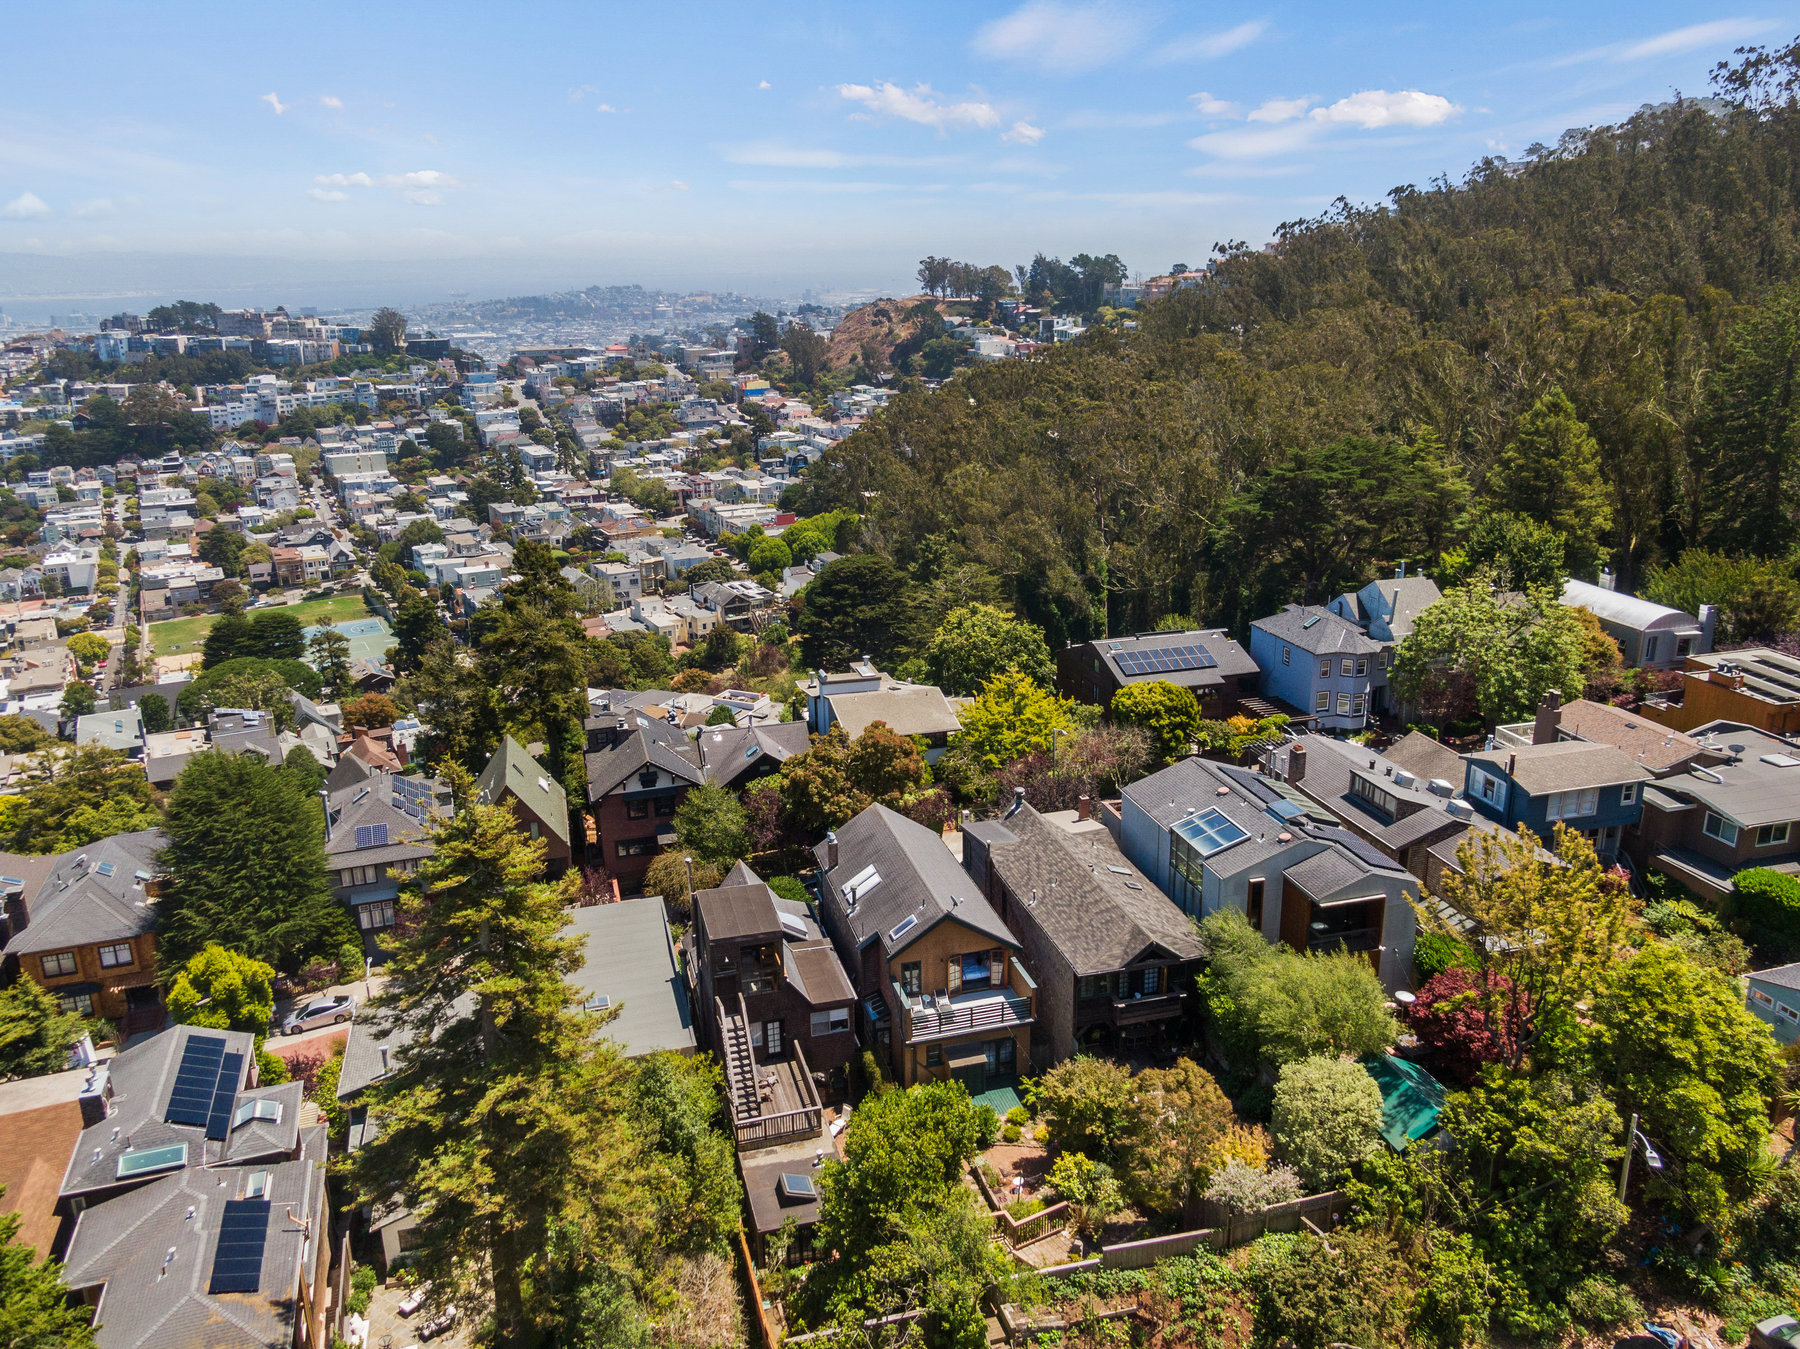 Property Photo: View of 205 Edgewood Avenue from above, showing San Francisco Bay